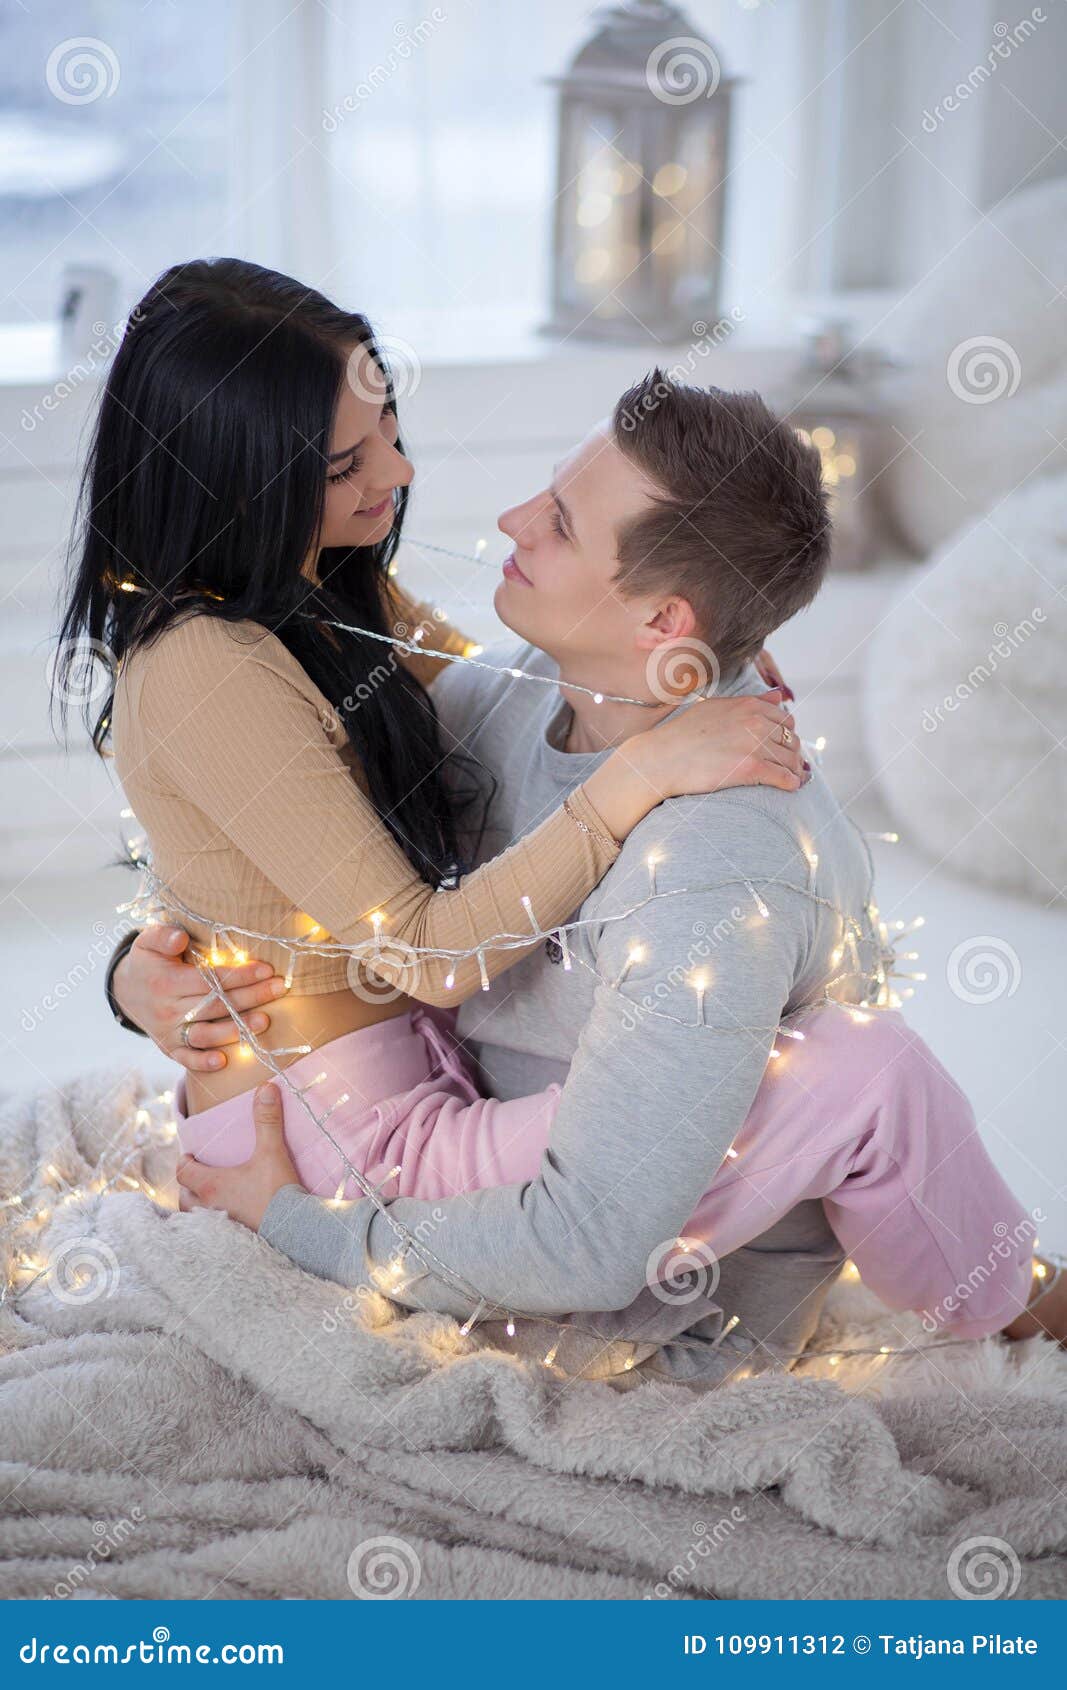 Couple in Love Hugging and Kissing at Home Stock Photo - Image of ...